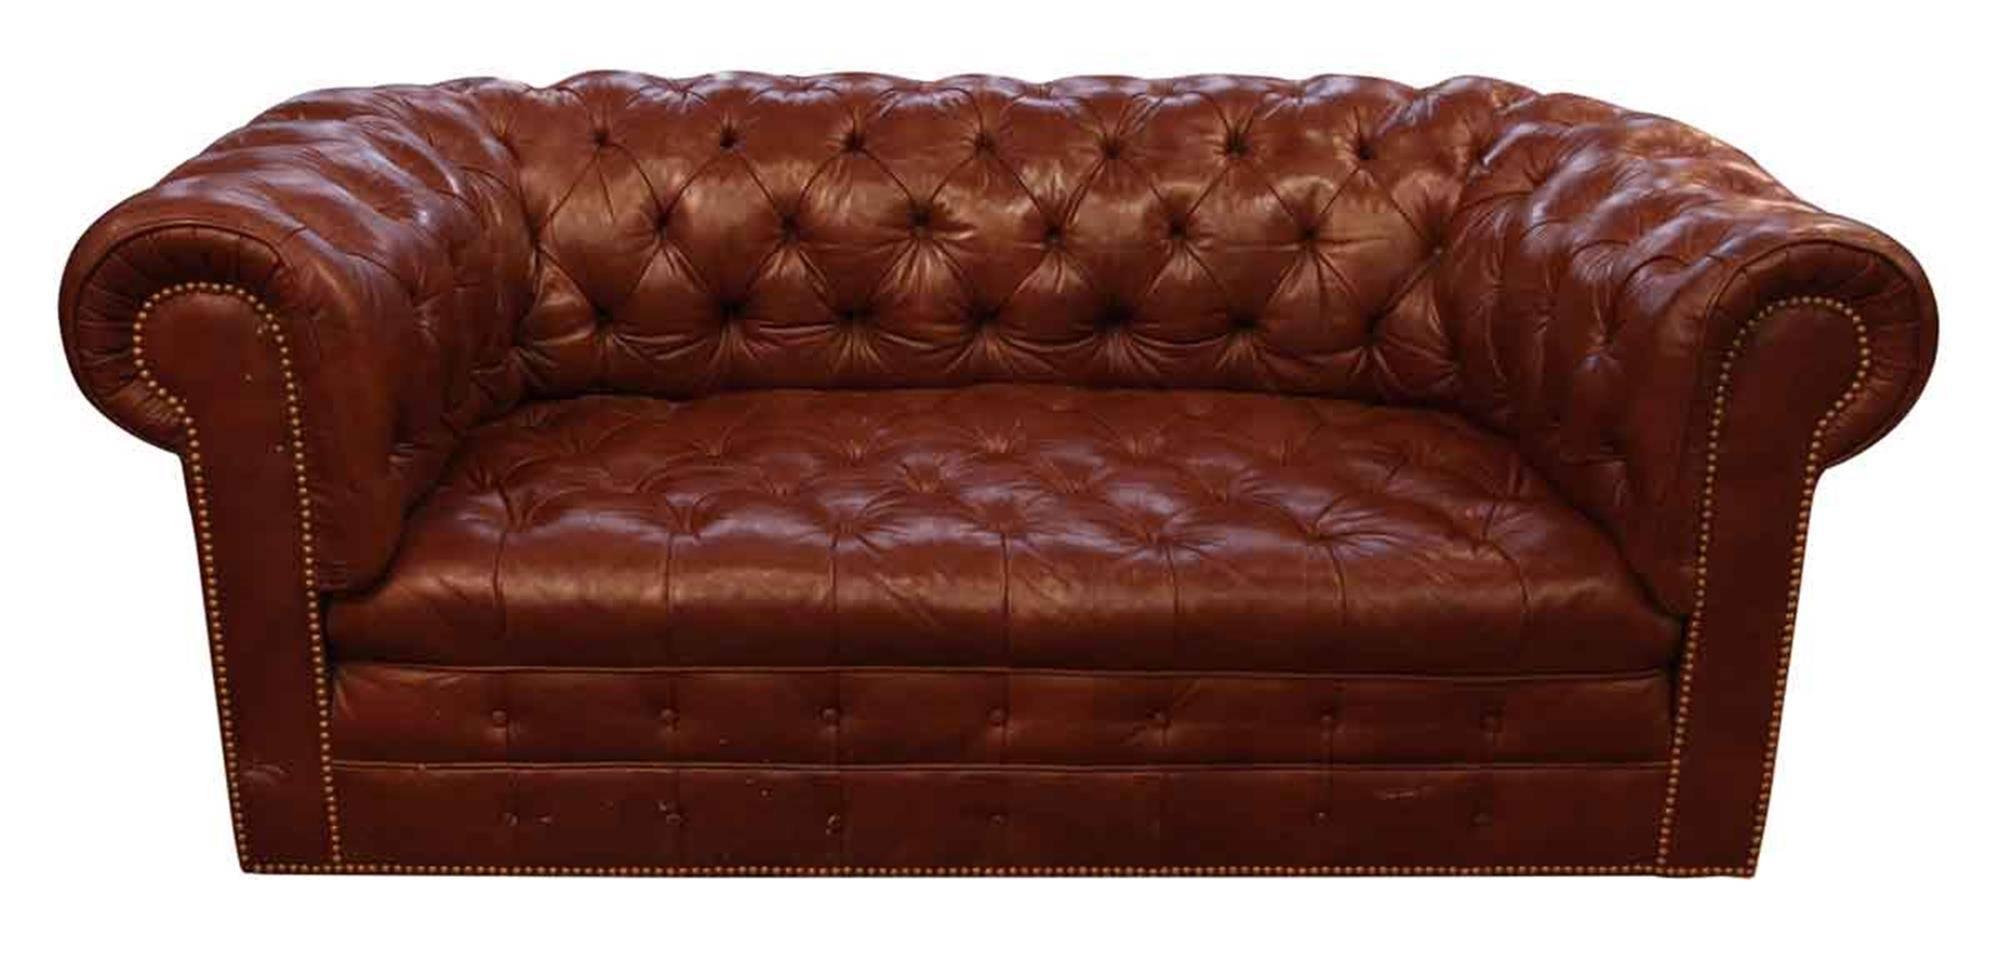 1970s, Hancock & Moore Chesterfield sofa in a rich brown leather with natural aged patina and light wear. Brass rivets adorn the frame and backside. This can be seen at our 149 Madison Ave location in Manhattan.